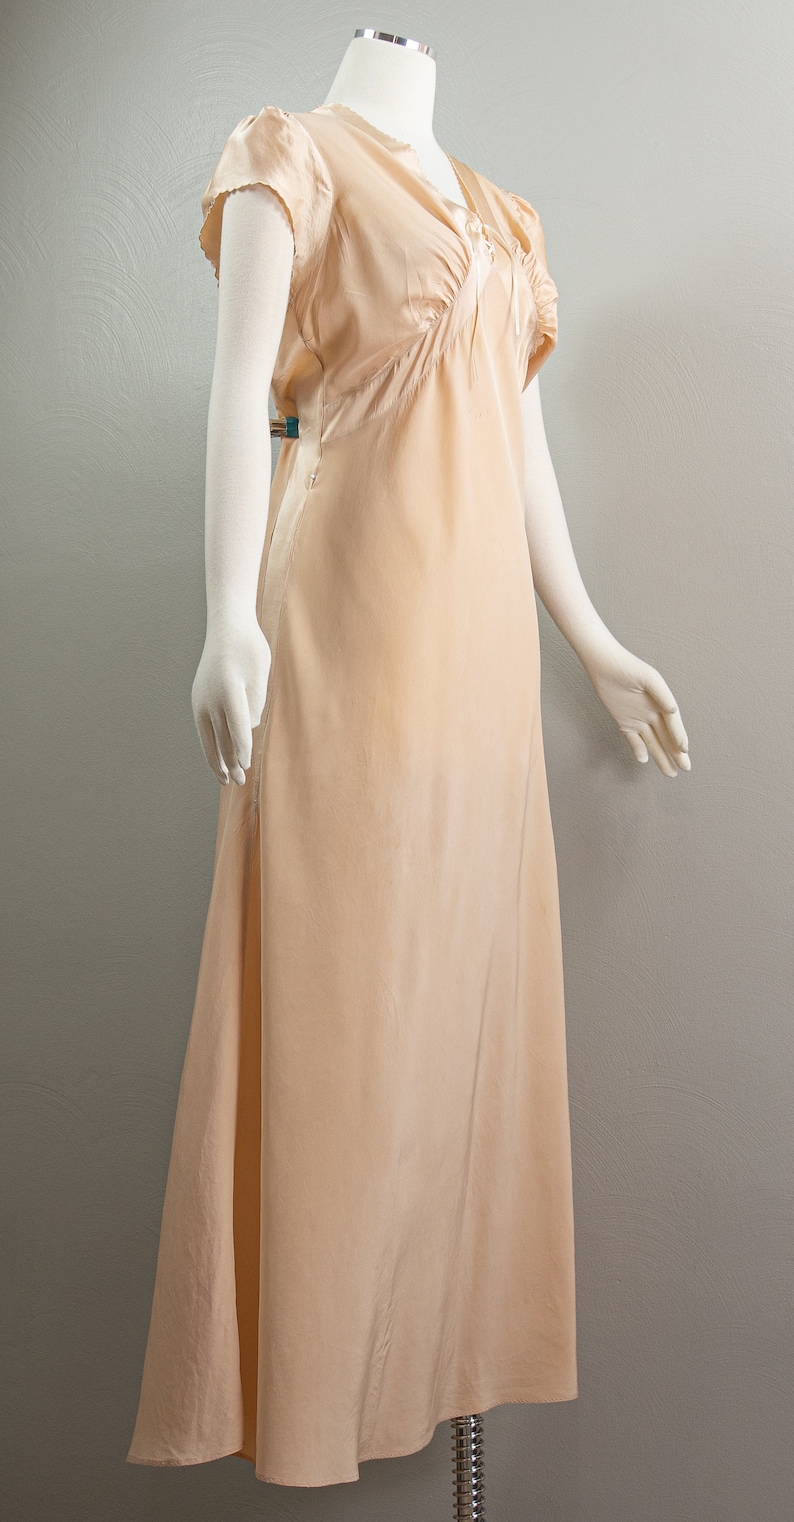 Dusty Rose 40s Barbizon Nightgown, Puffed Cape Sleeves, Slip Dress, Large Size. image 4